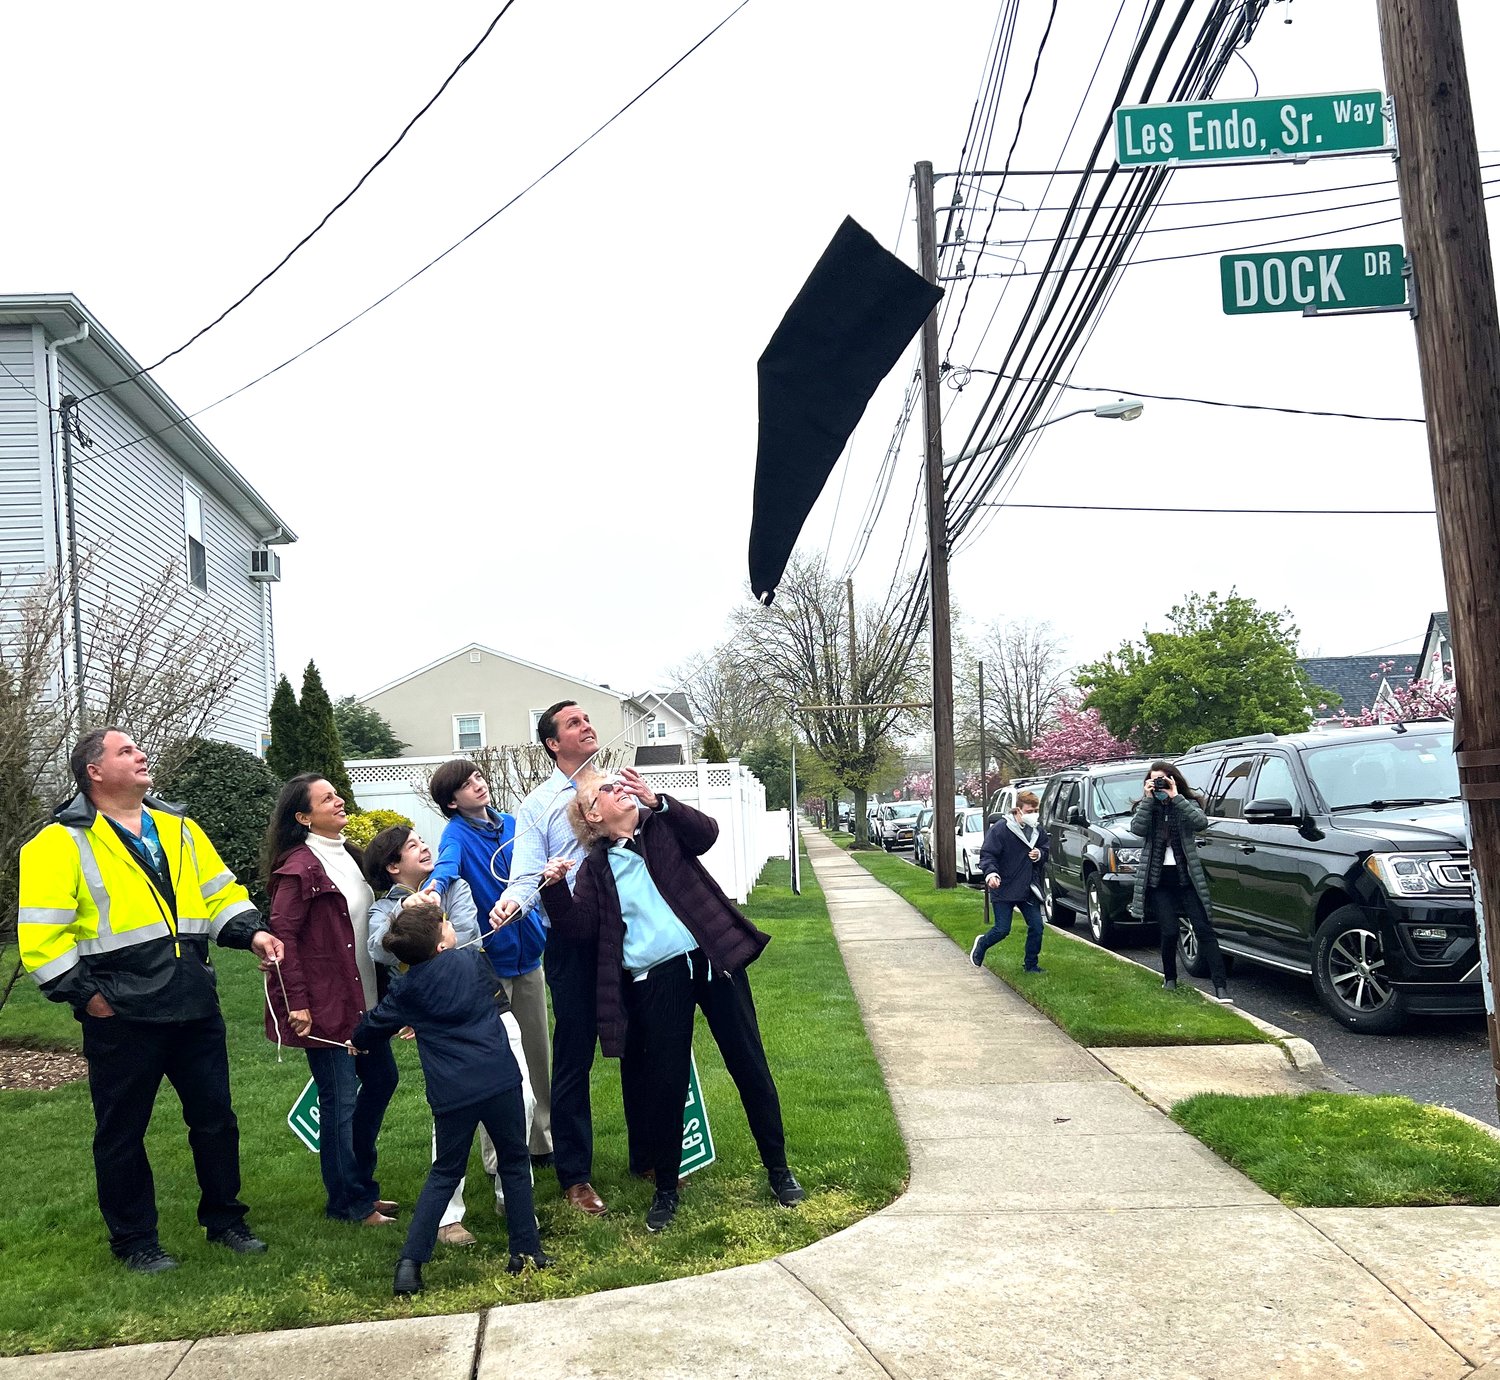 Marianne Endo, right, and her family pulled the veil from the new street sign commemorating her husband, Lester Endo. Surrounding her were Lester Endo Jr. at left, his wife Kimberly, grandsons Logan, William, and Andrew, and son Kenneth. At right, one of Les’s canoeing buddies, Casey Baierlein, approached while his mother Pat took a photo.